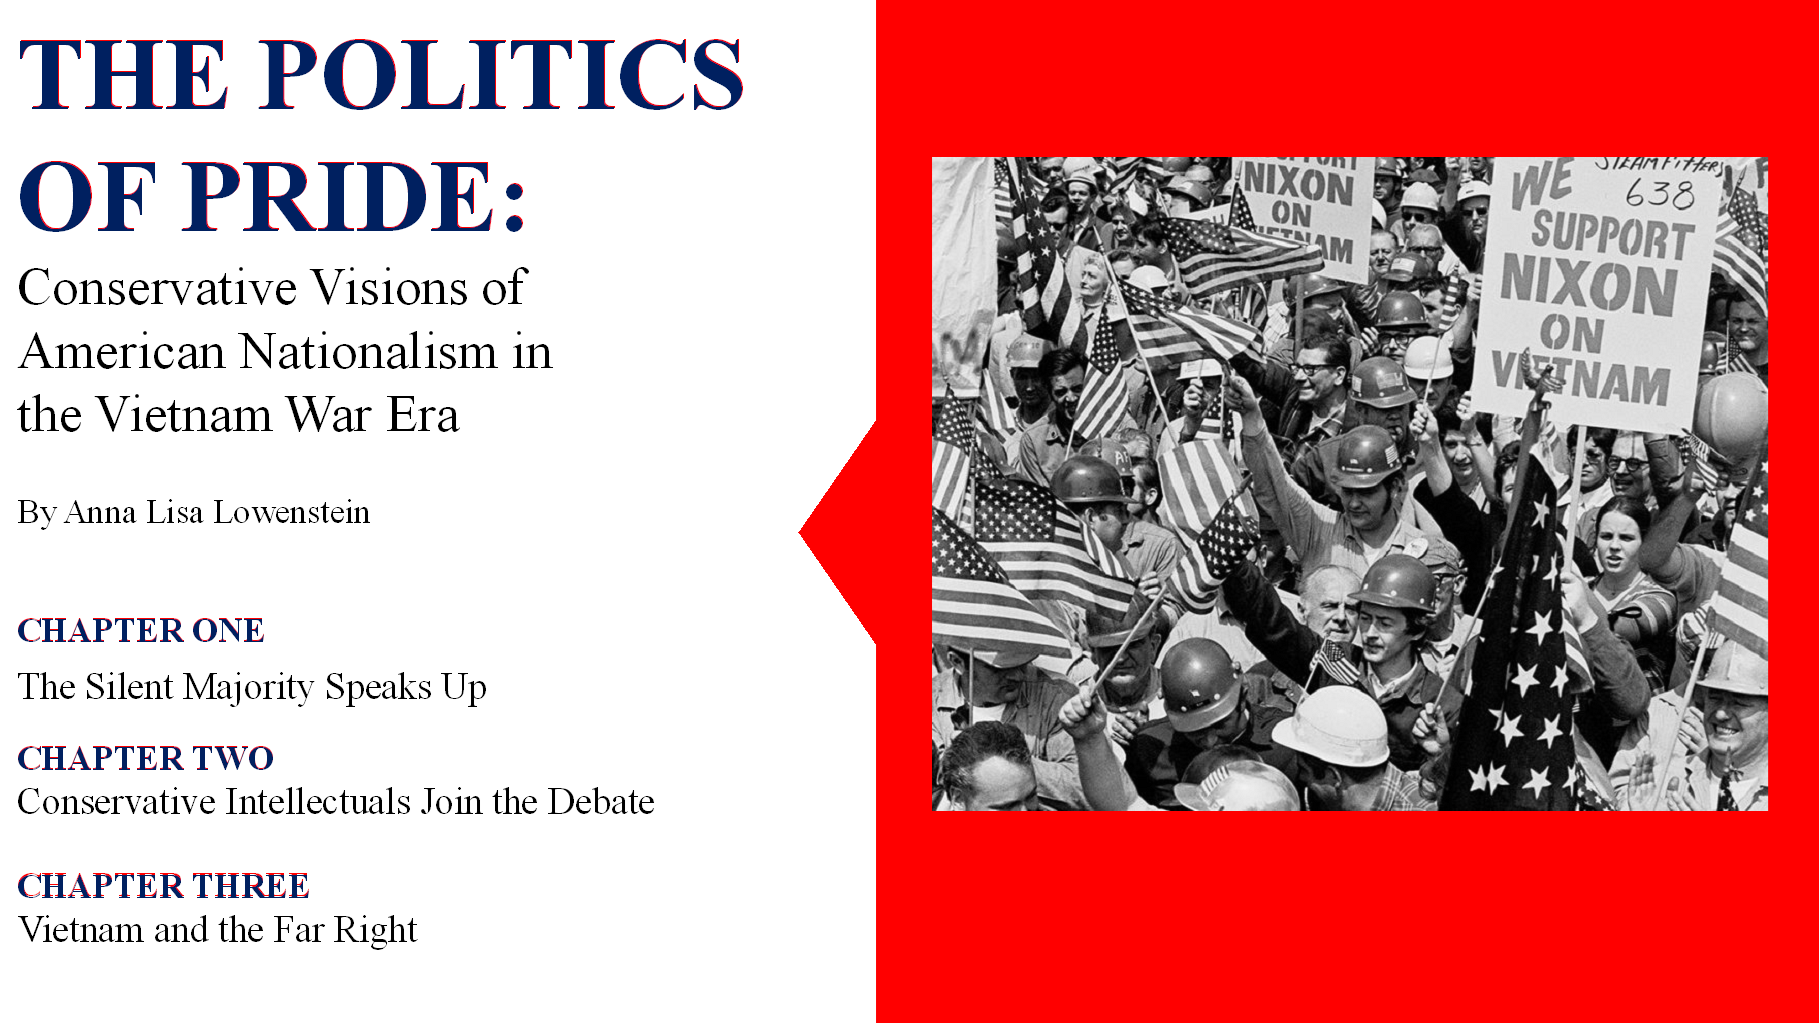 The Politics of Pride: Conservative Visions of American Nationalism in the Vietnam War Era